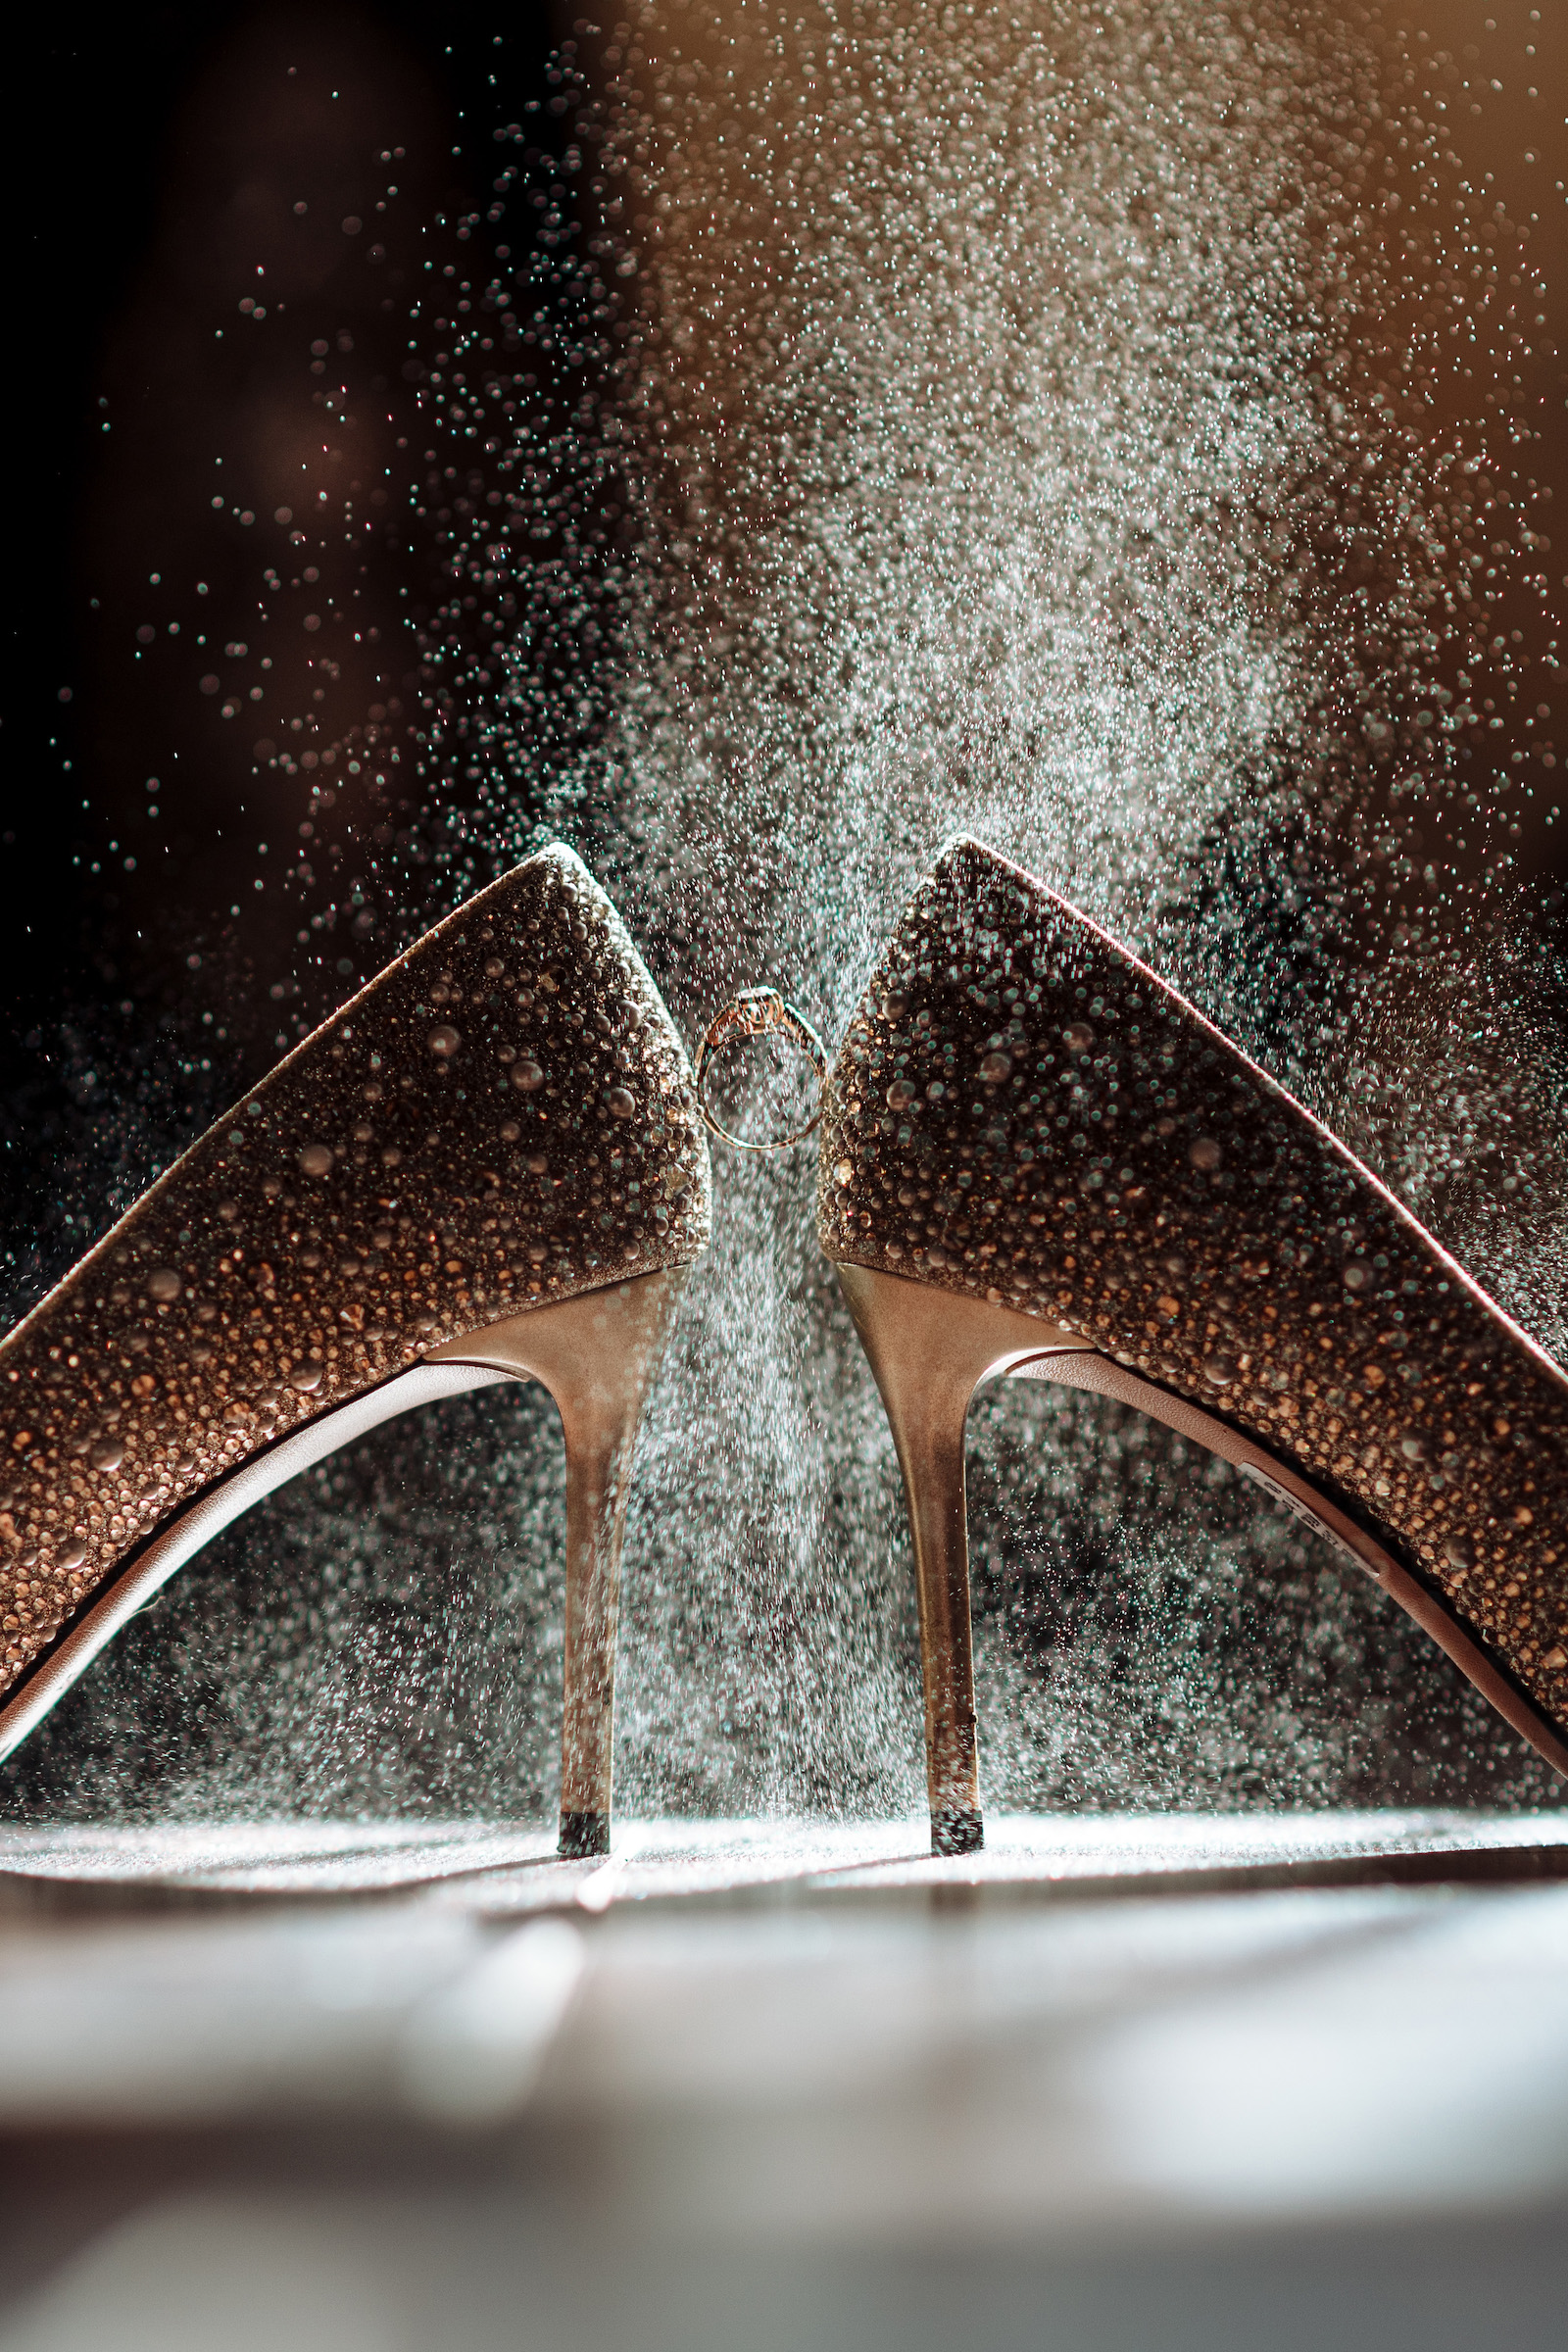 Wedding,Shoes,With,A,Wedding,Ring,Under,A,Splash,Of